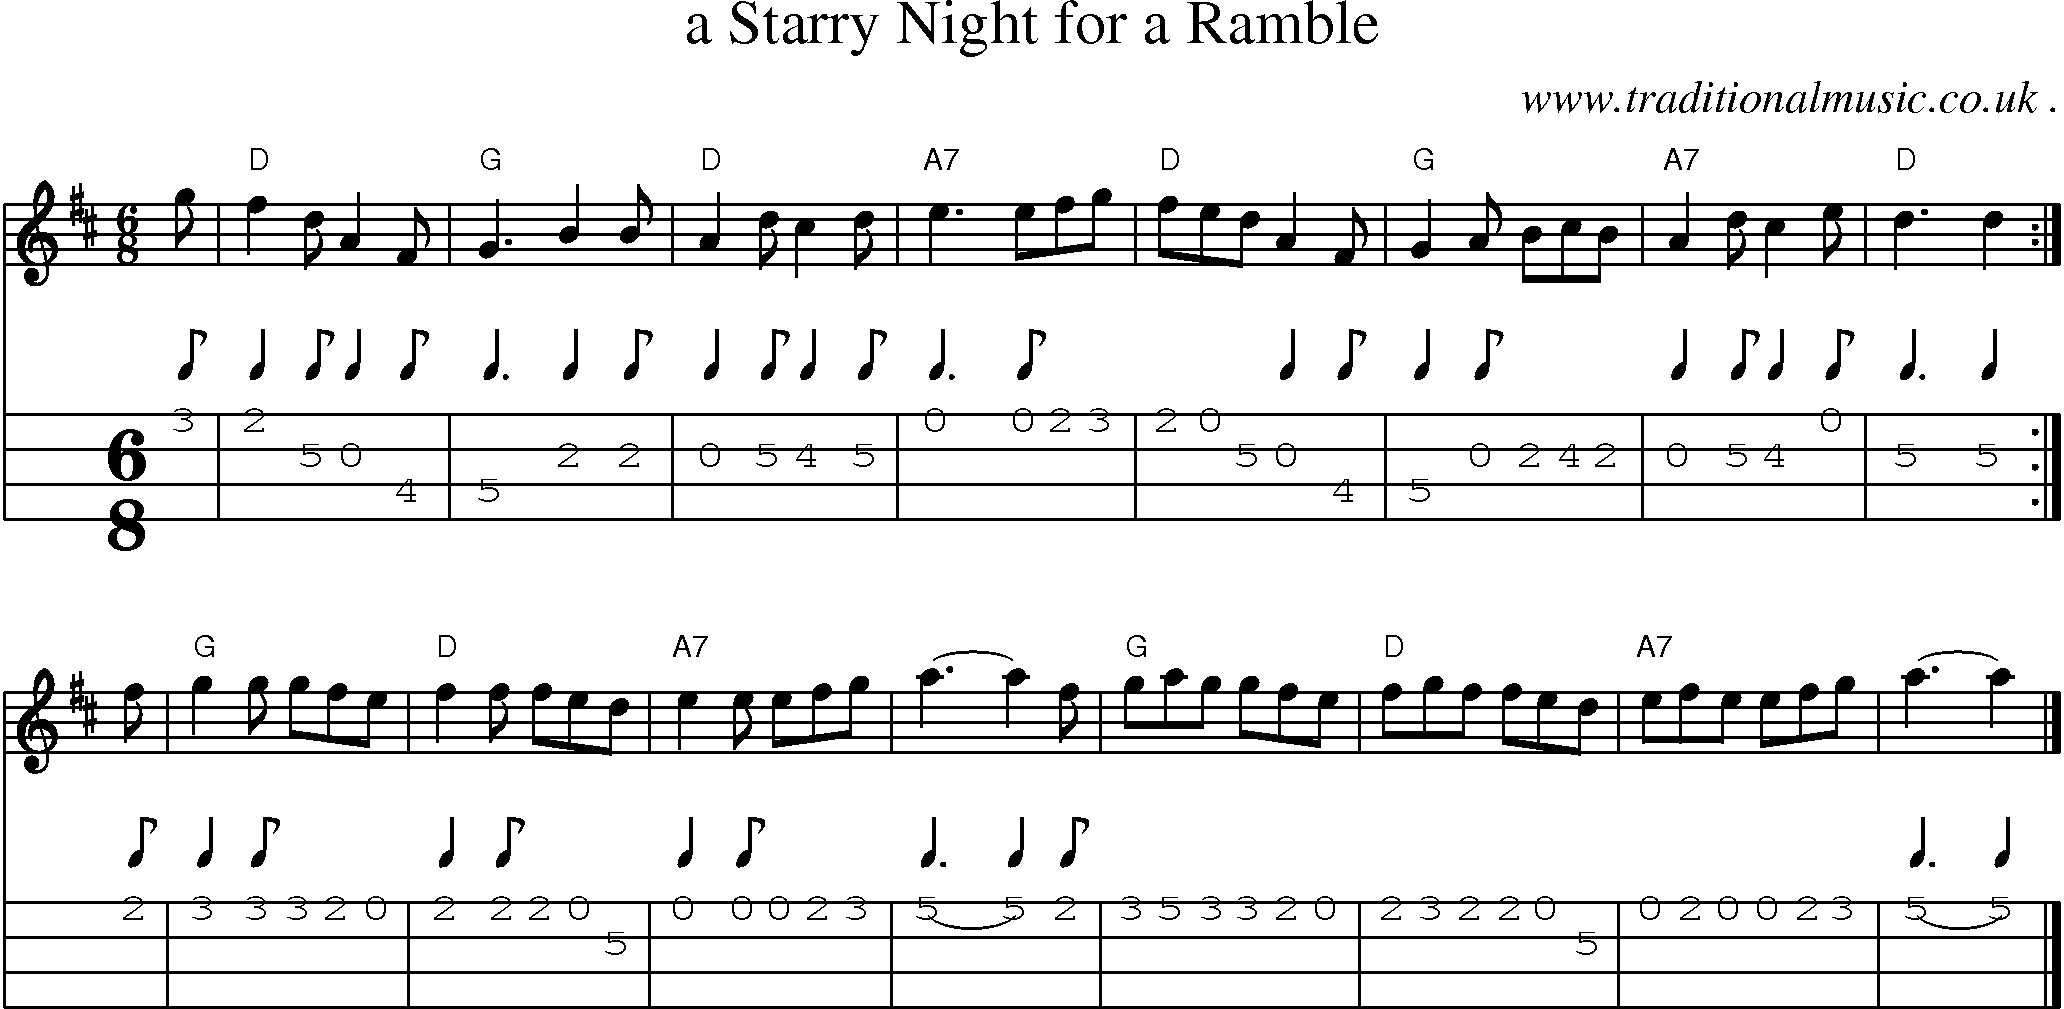 Sheet-music  score, Chords and Mandolin Tabs for A Starry Night For A Ramble